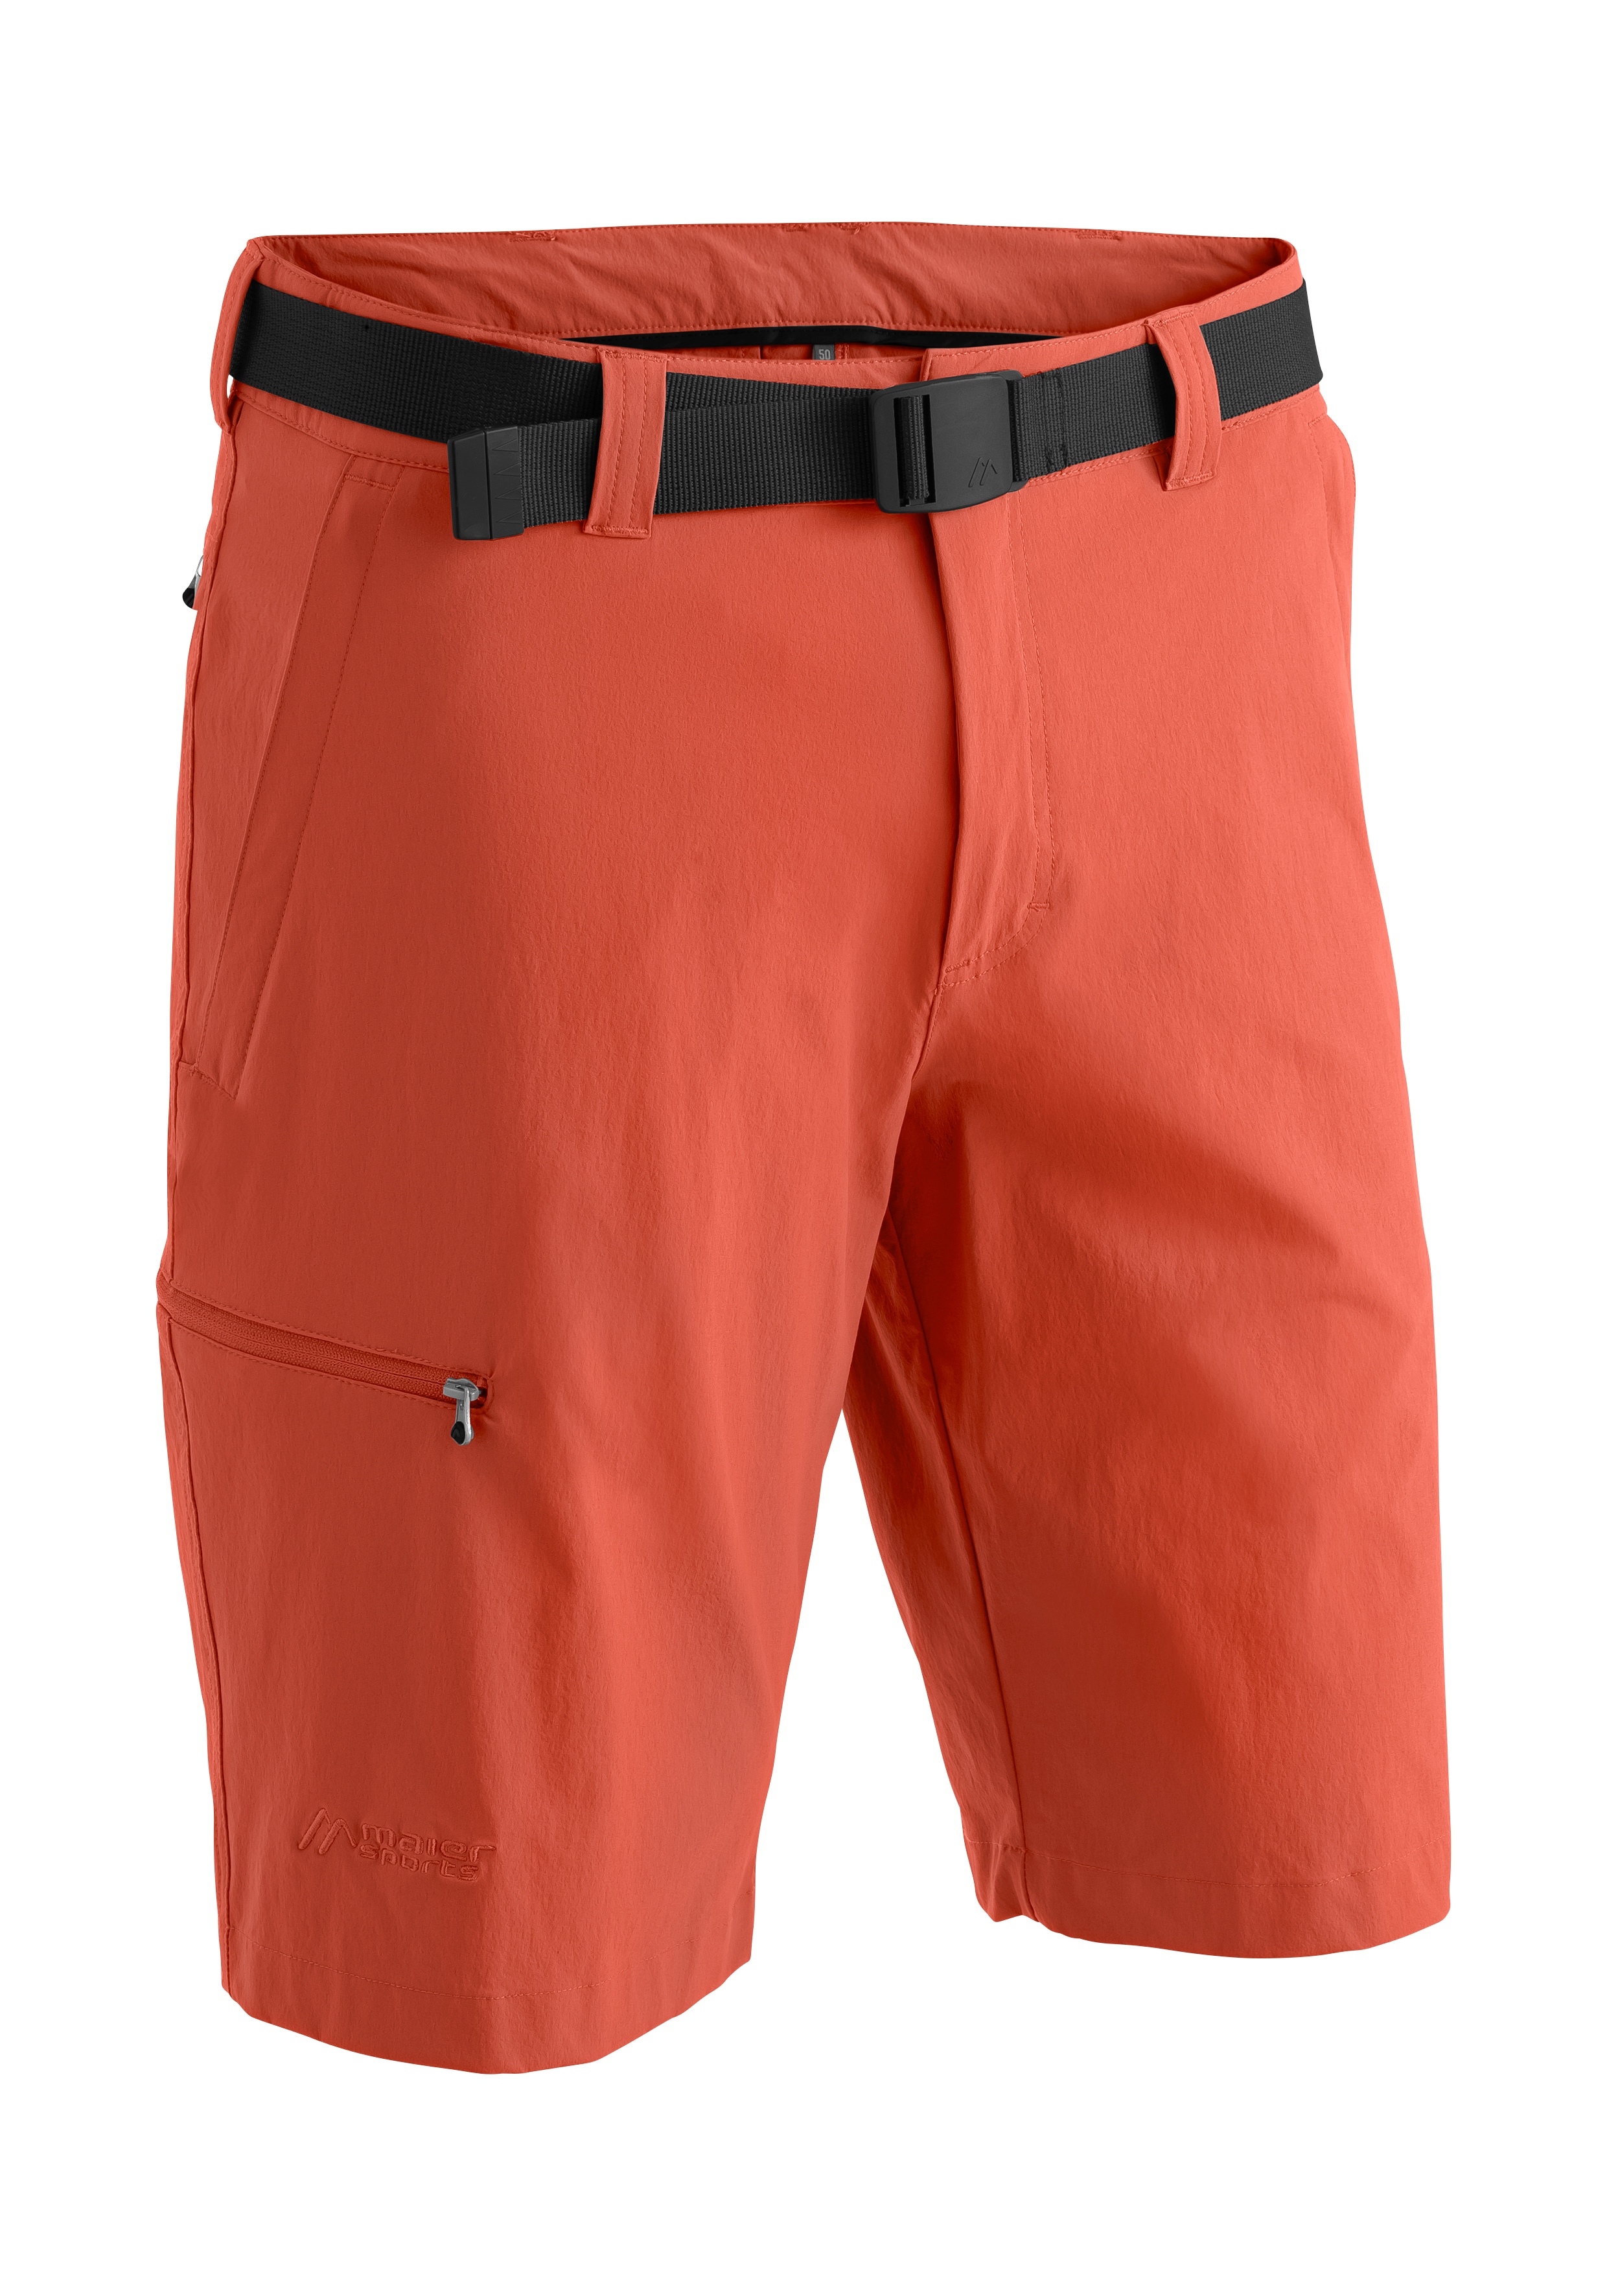 Maier Sports Funktionsshorts "Huang"